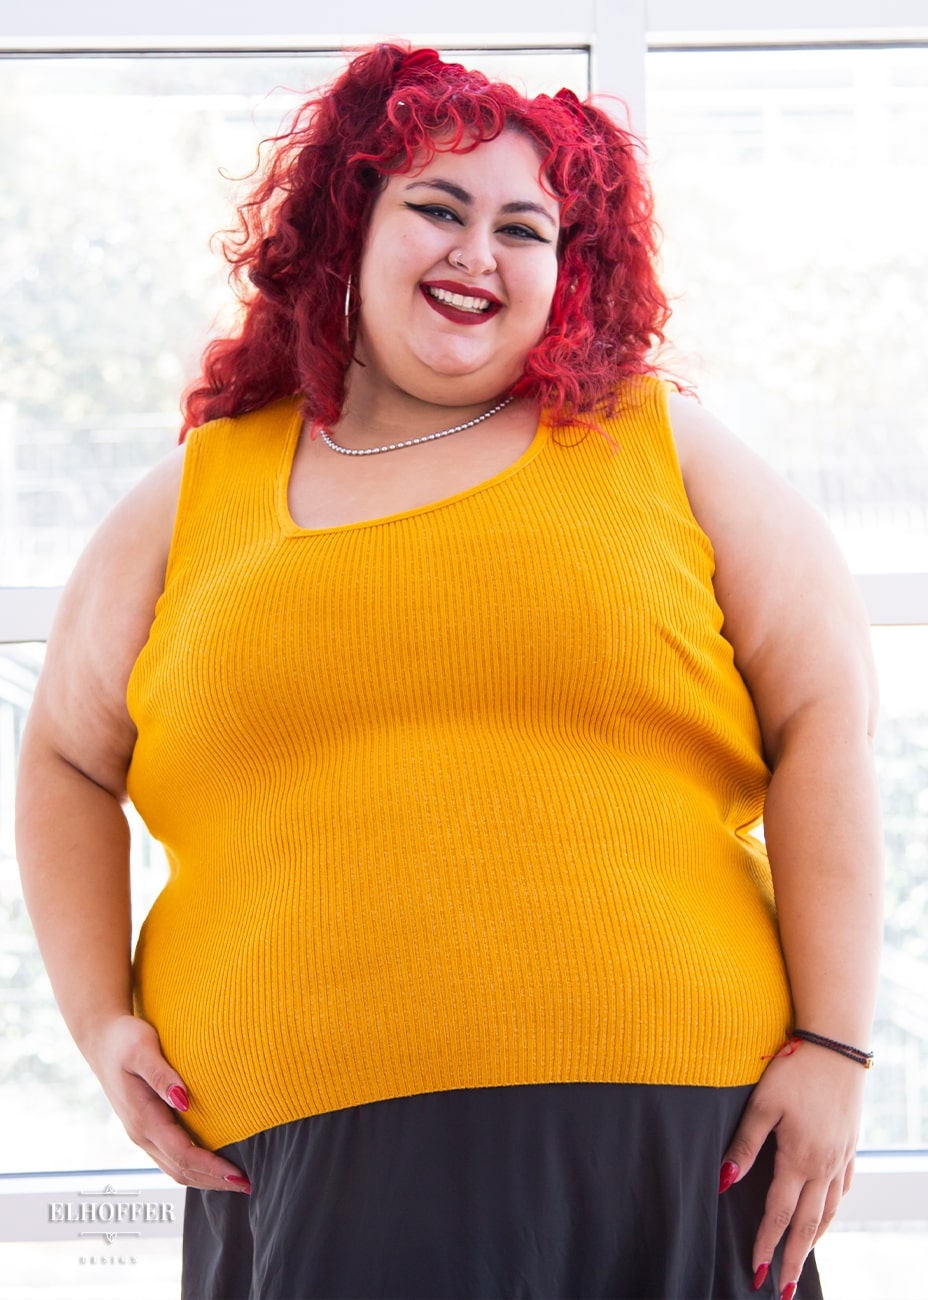 Victoria, an olive skinned size 4XL model with bright red curly hair, is wearing a pullover sleeveless ribbed sweater tank with an asymmetrical neckline in mustard yellow.